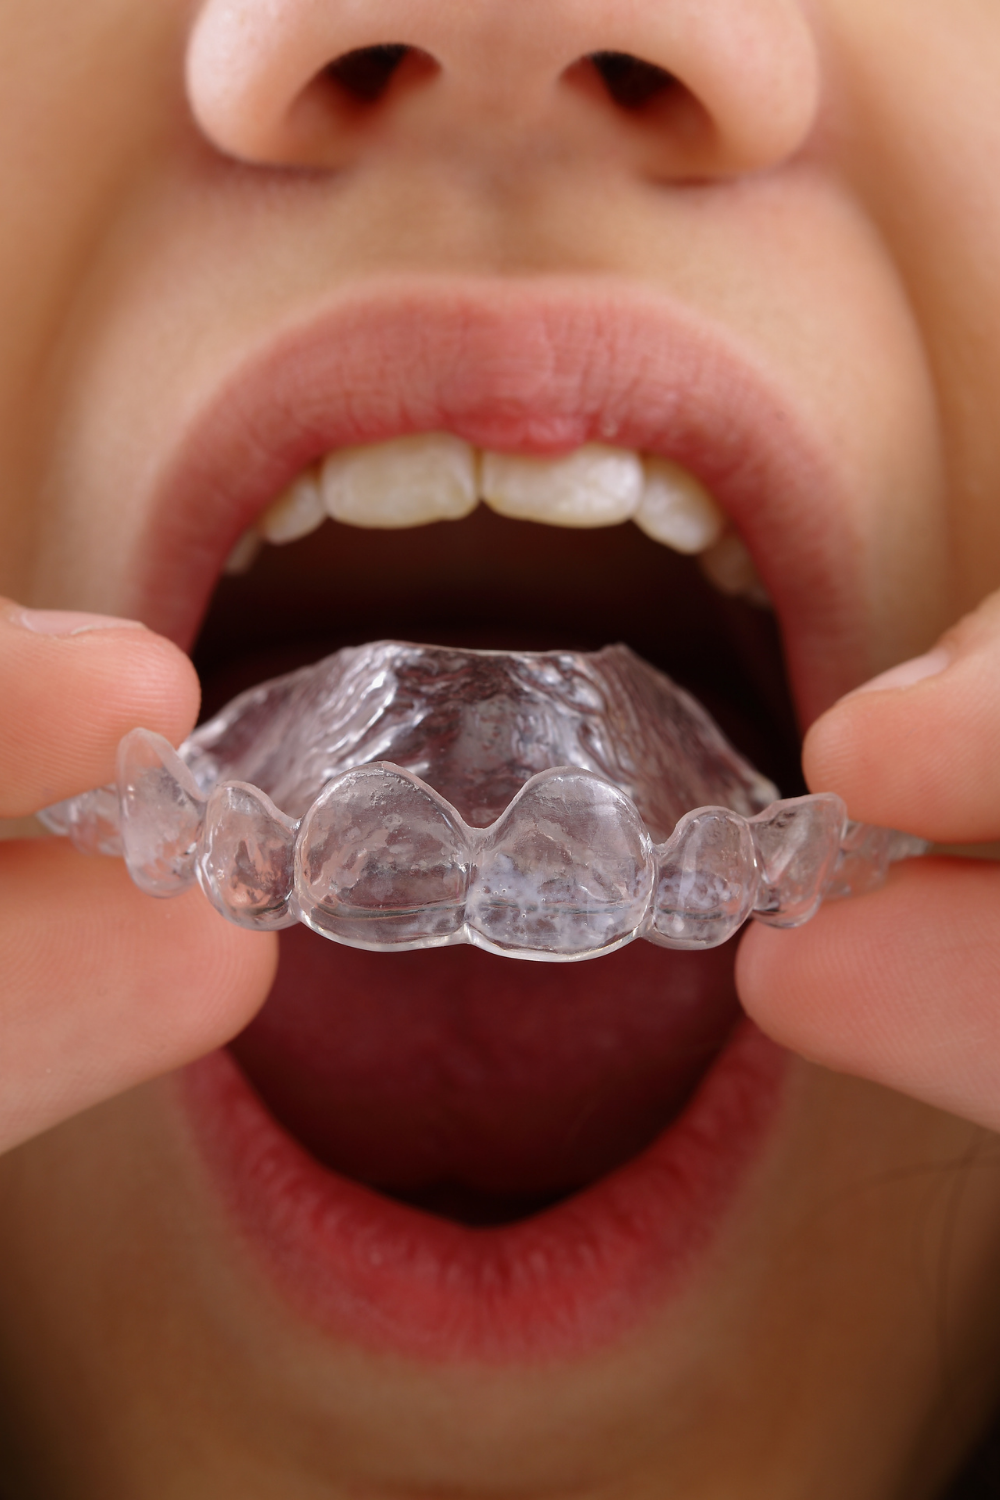 Here are 5 Fantastic Facts About Retainers